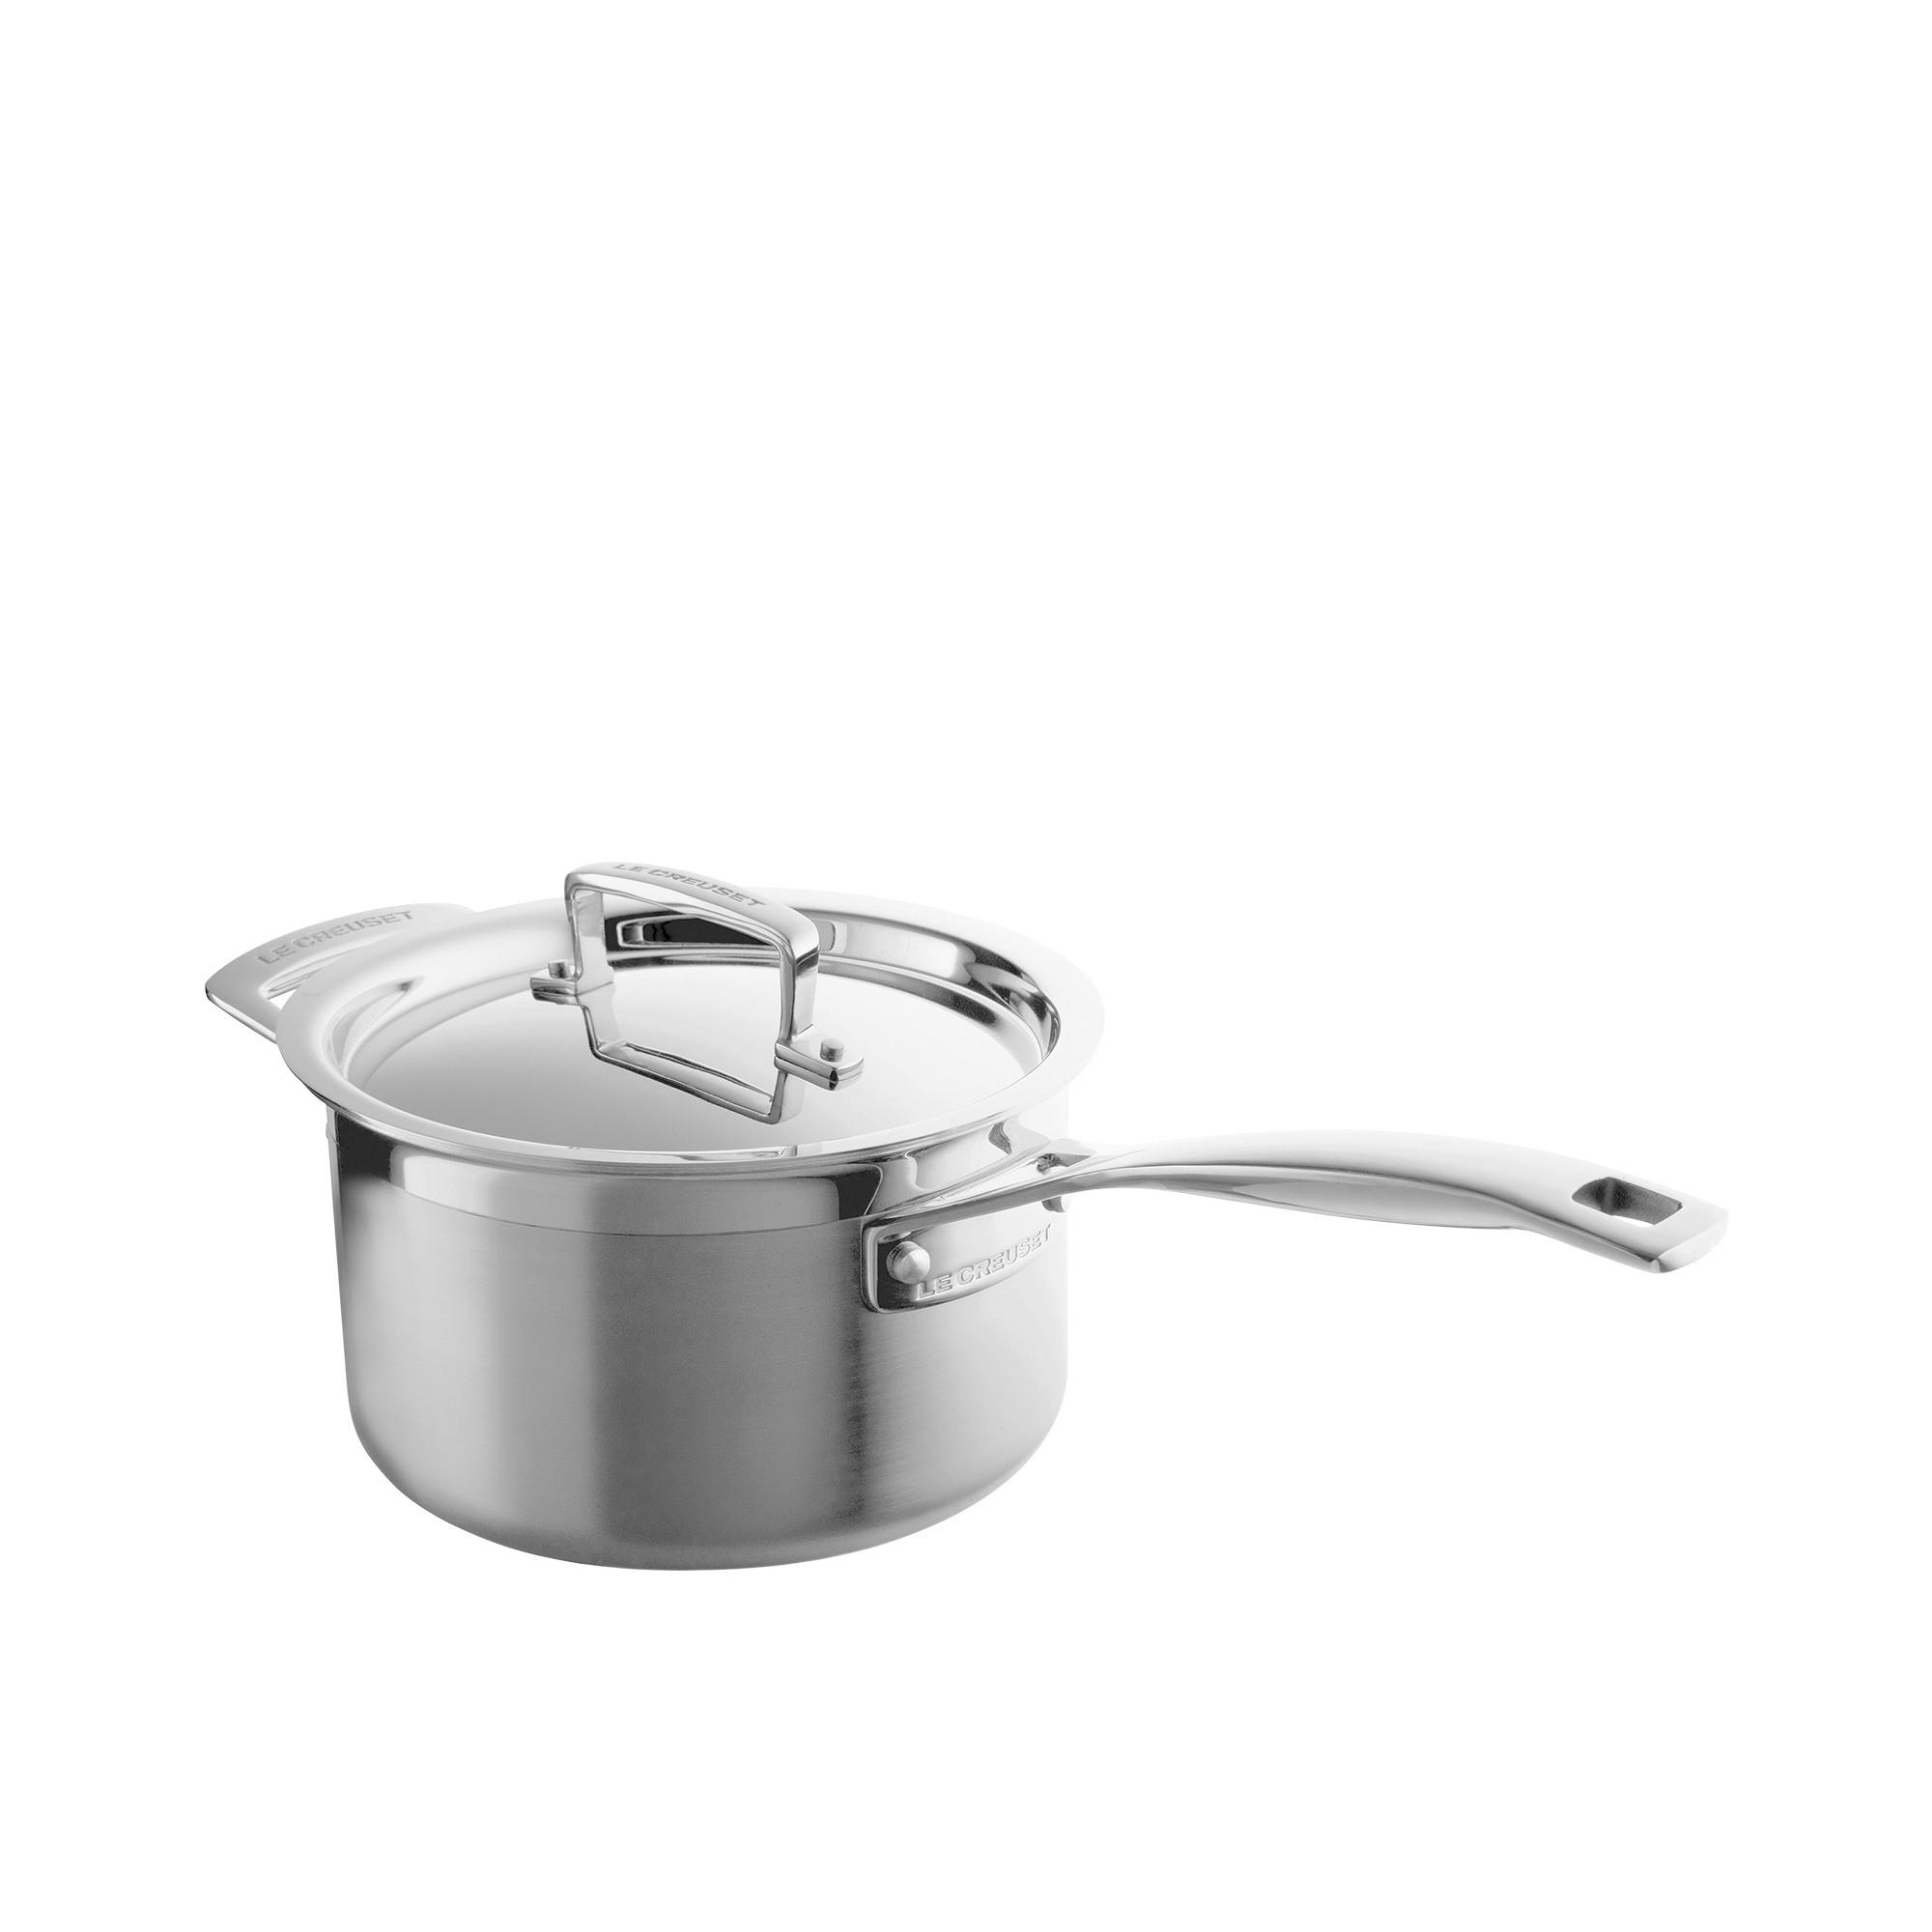 Le Creuset 3-Ply Stainless Steel Saucepan with Lid 18cm - 2.8L Image 3